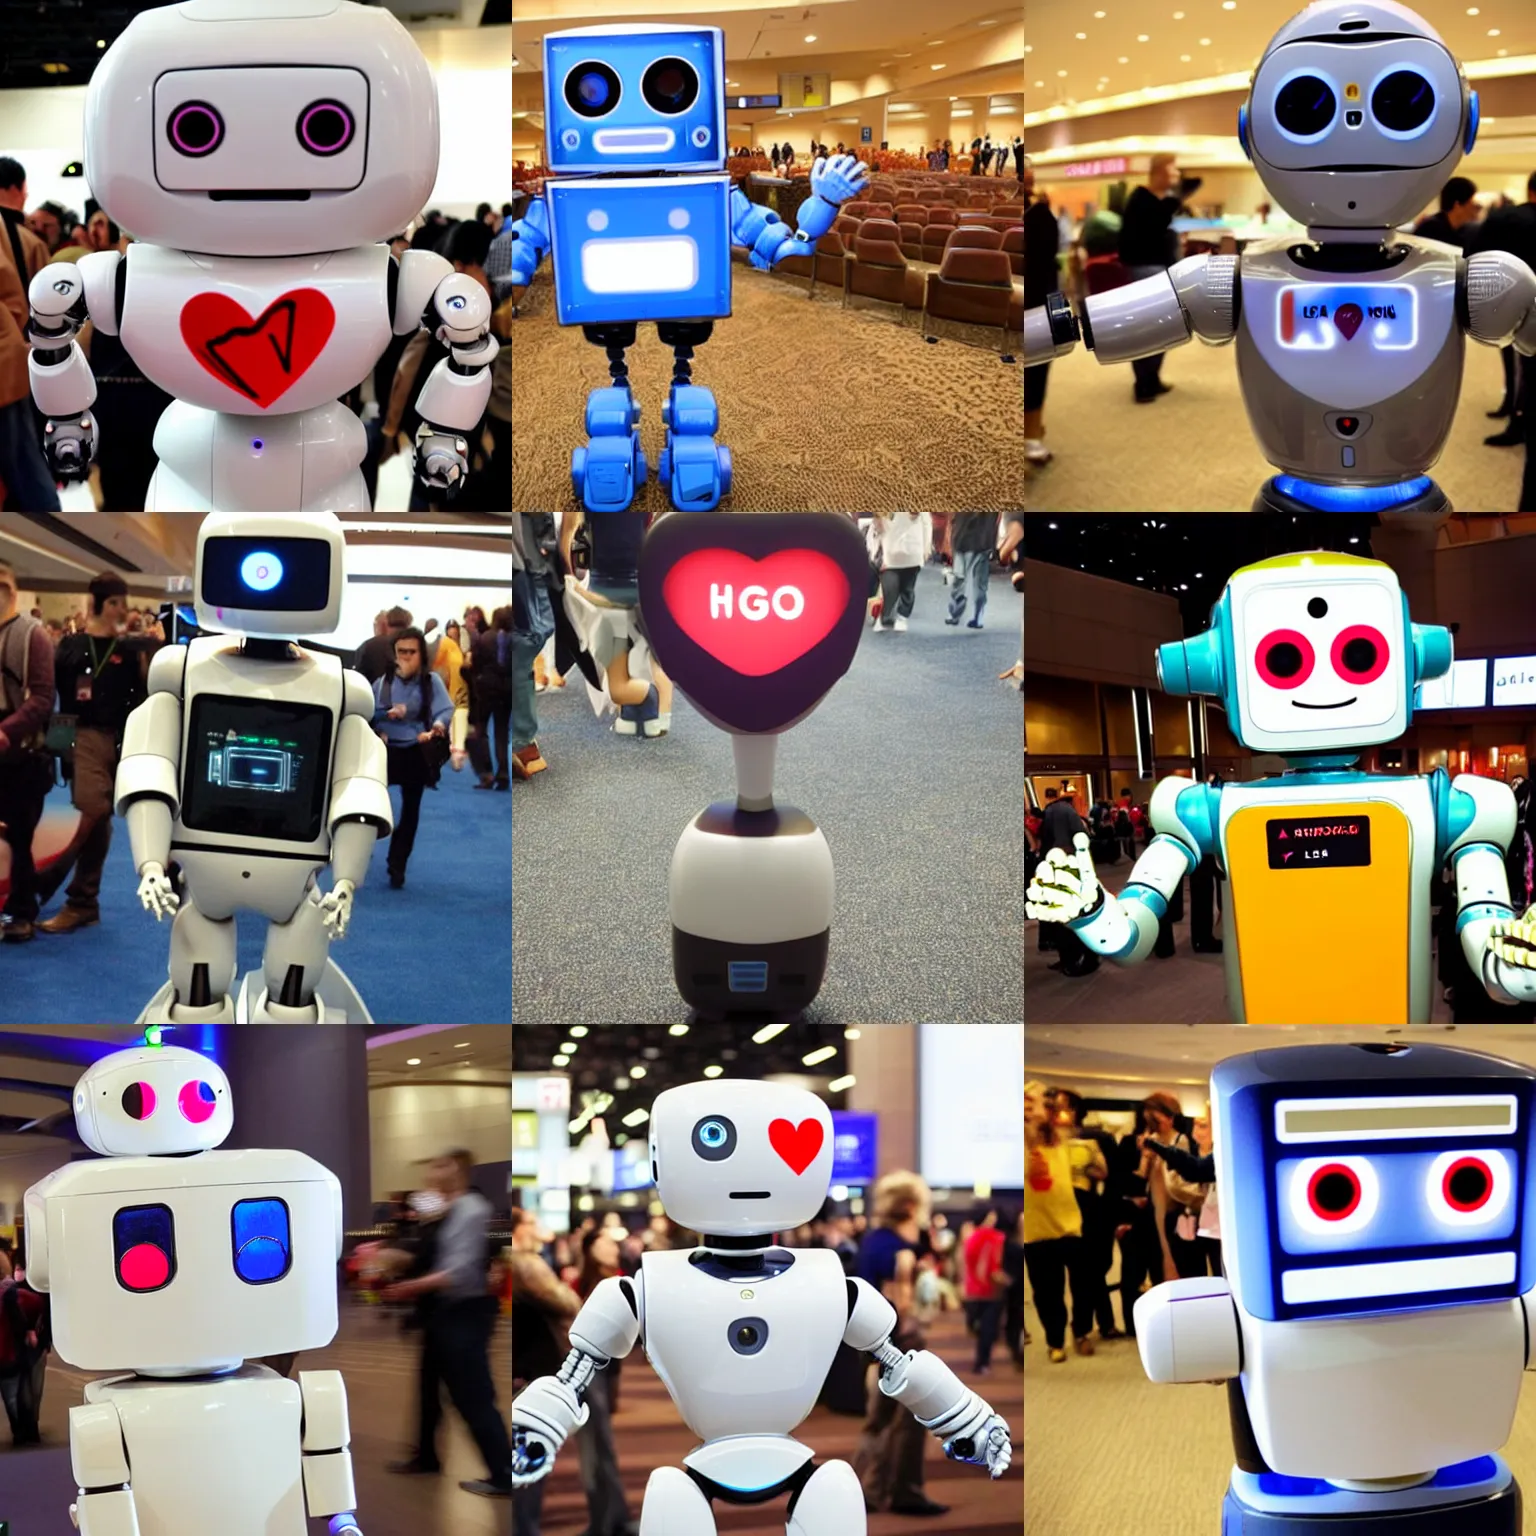 Prompt: <robot attention-grabbing wants=hug expression='give hug now' location='las vegas convention center'>i love this little robot</robot>